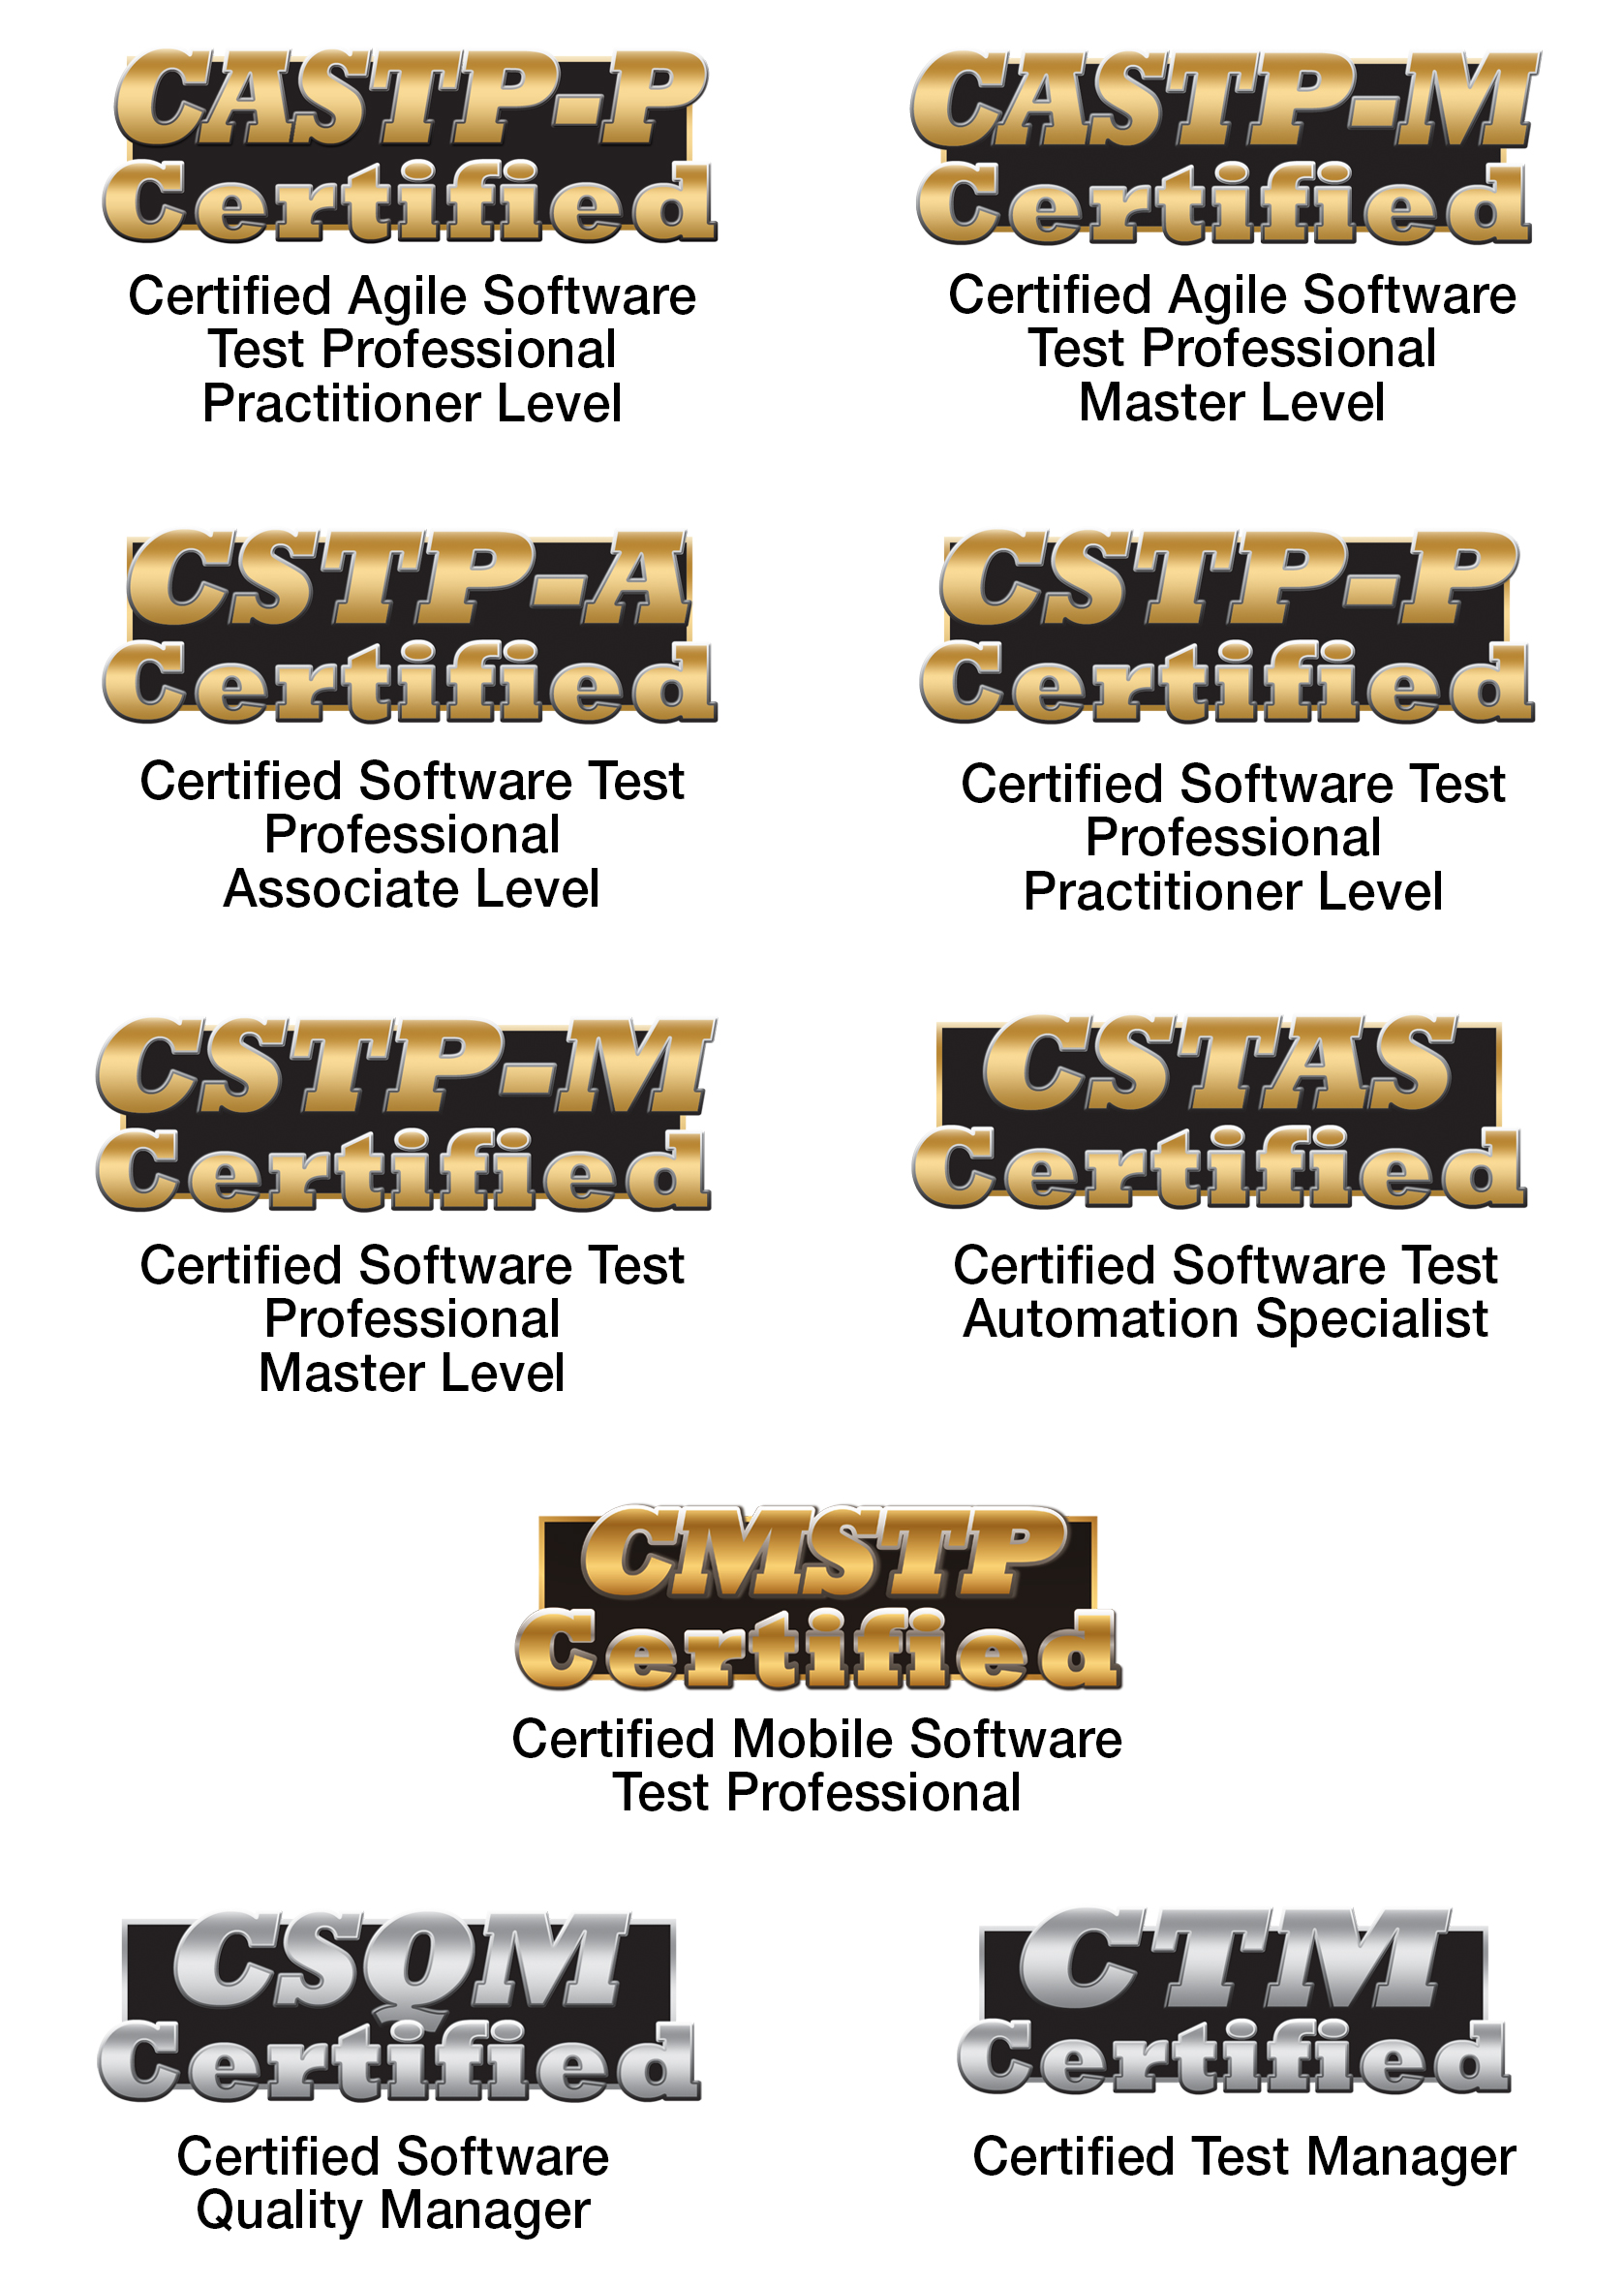 Education-Based Software Testing Certifications from IIST